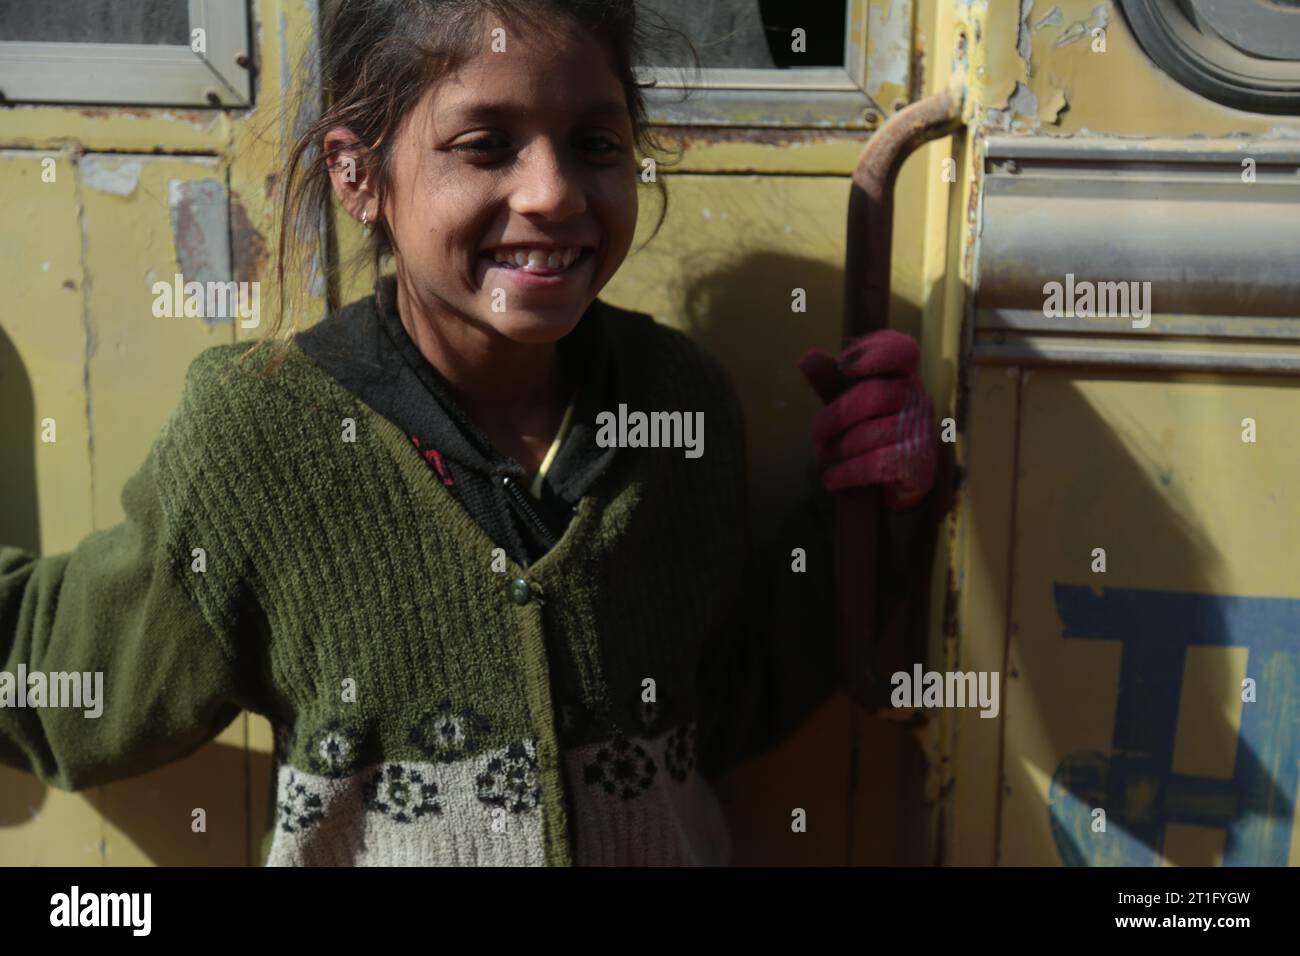 Beer Chhapar Rural, Rajasthan, India - January 18, 2017: Young Indian girl outside the yellow train door. Portrait Stock Photo